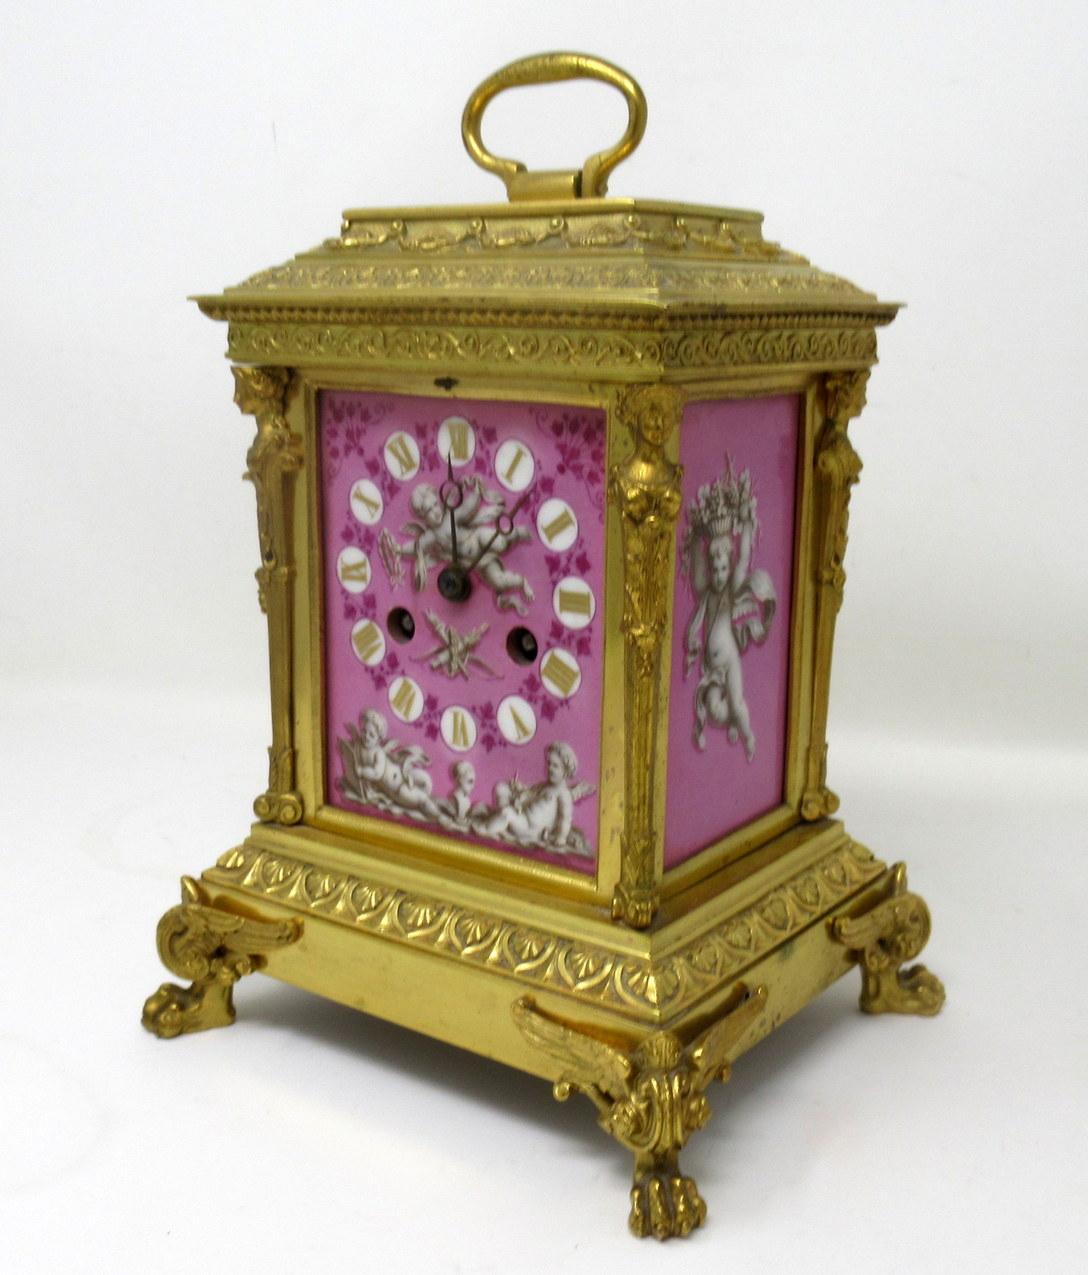 A fine early to mid-nineteenth century French Ormolu and Pampadour pink porcelain carriage or mantle clock of outstanding Quality and compact proportions. 

The circular pink ground enamel dial having gilt brass decorative Roman hour gilt